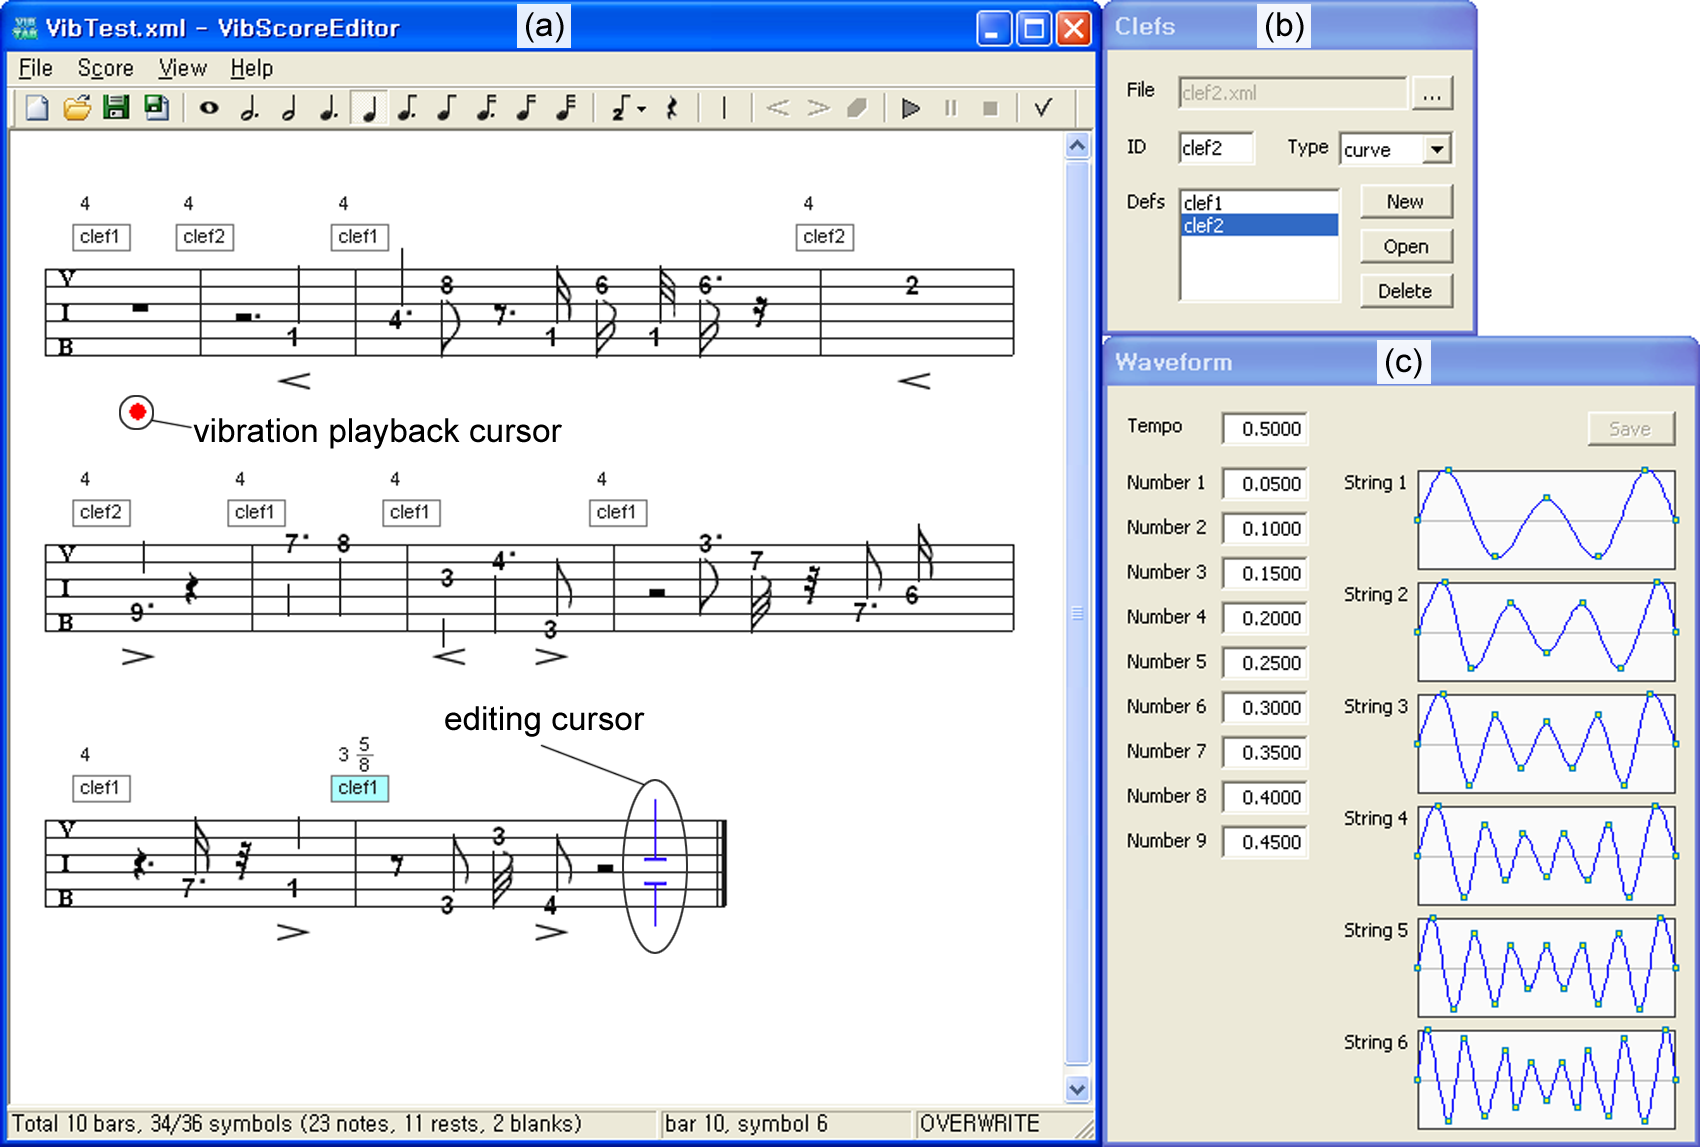 An image of VibScoreEditor to aid in identification.